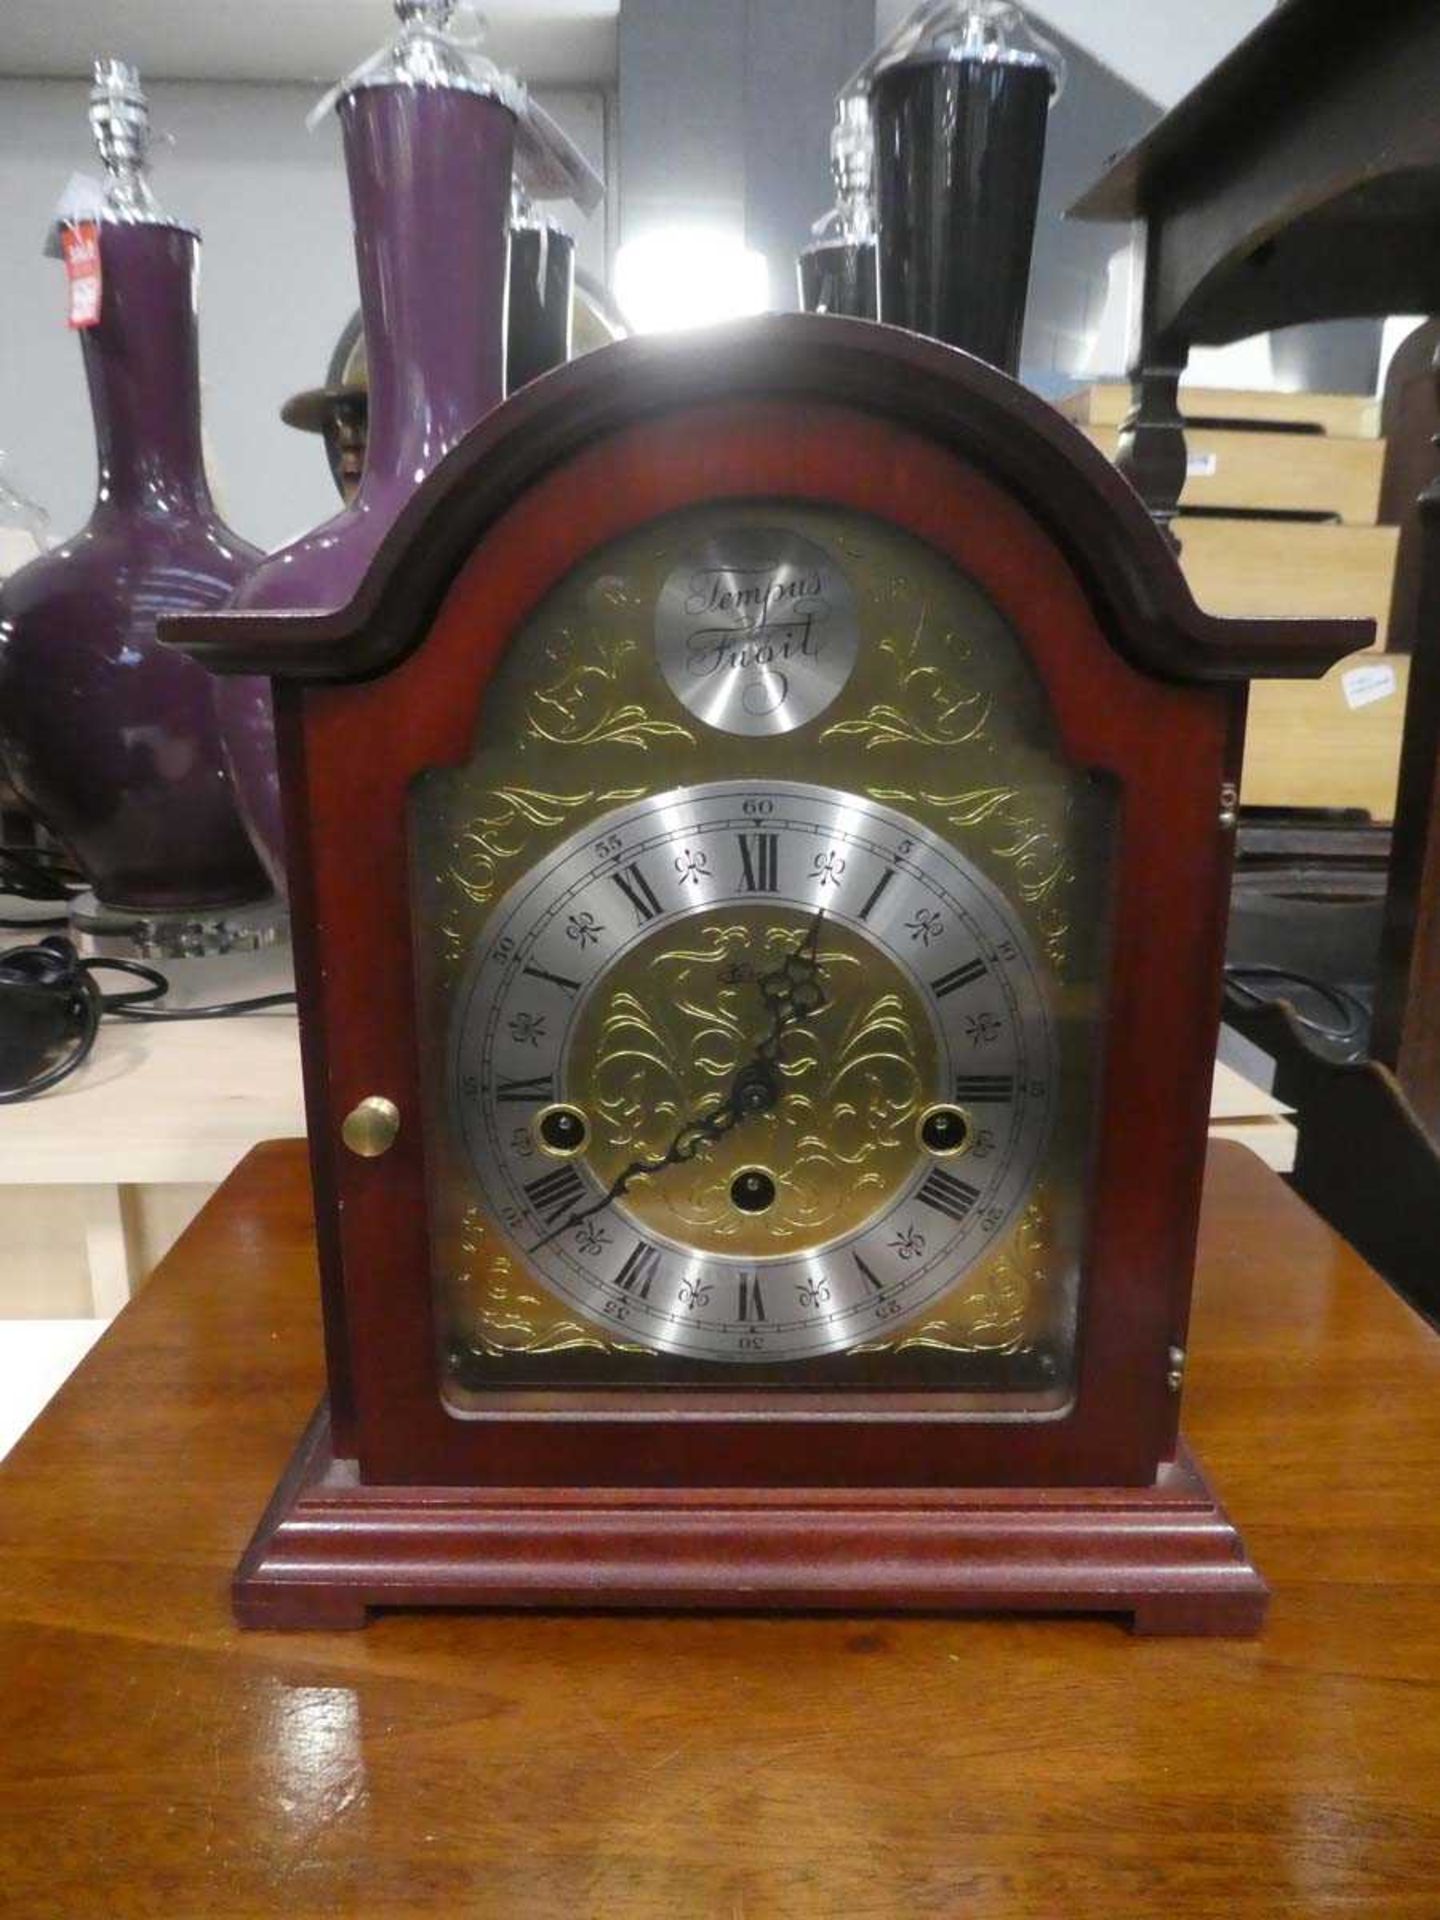 Modern dome topped mantle clock